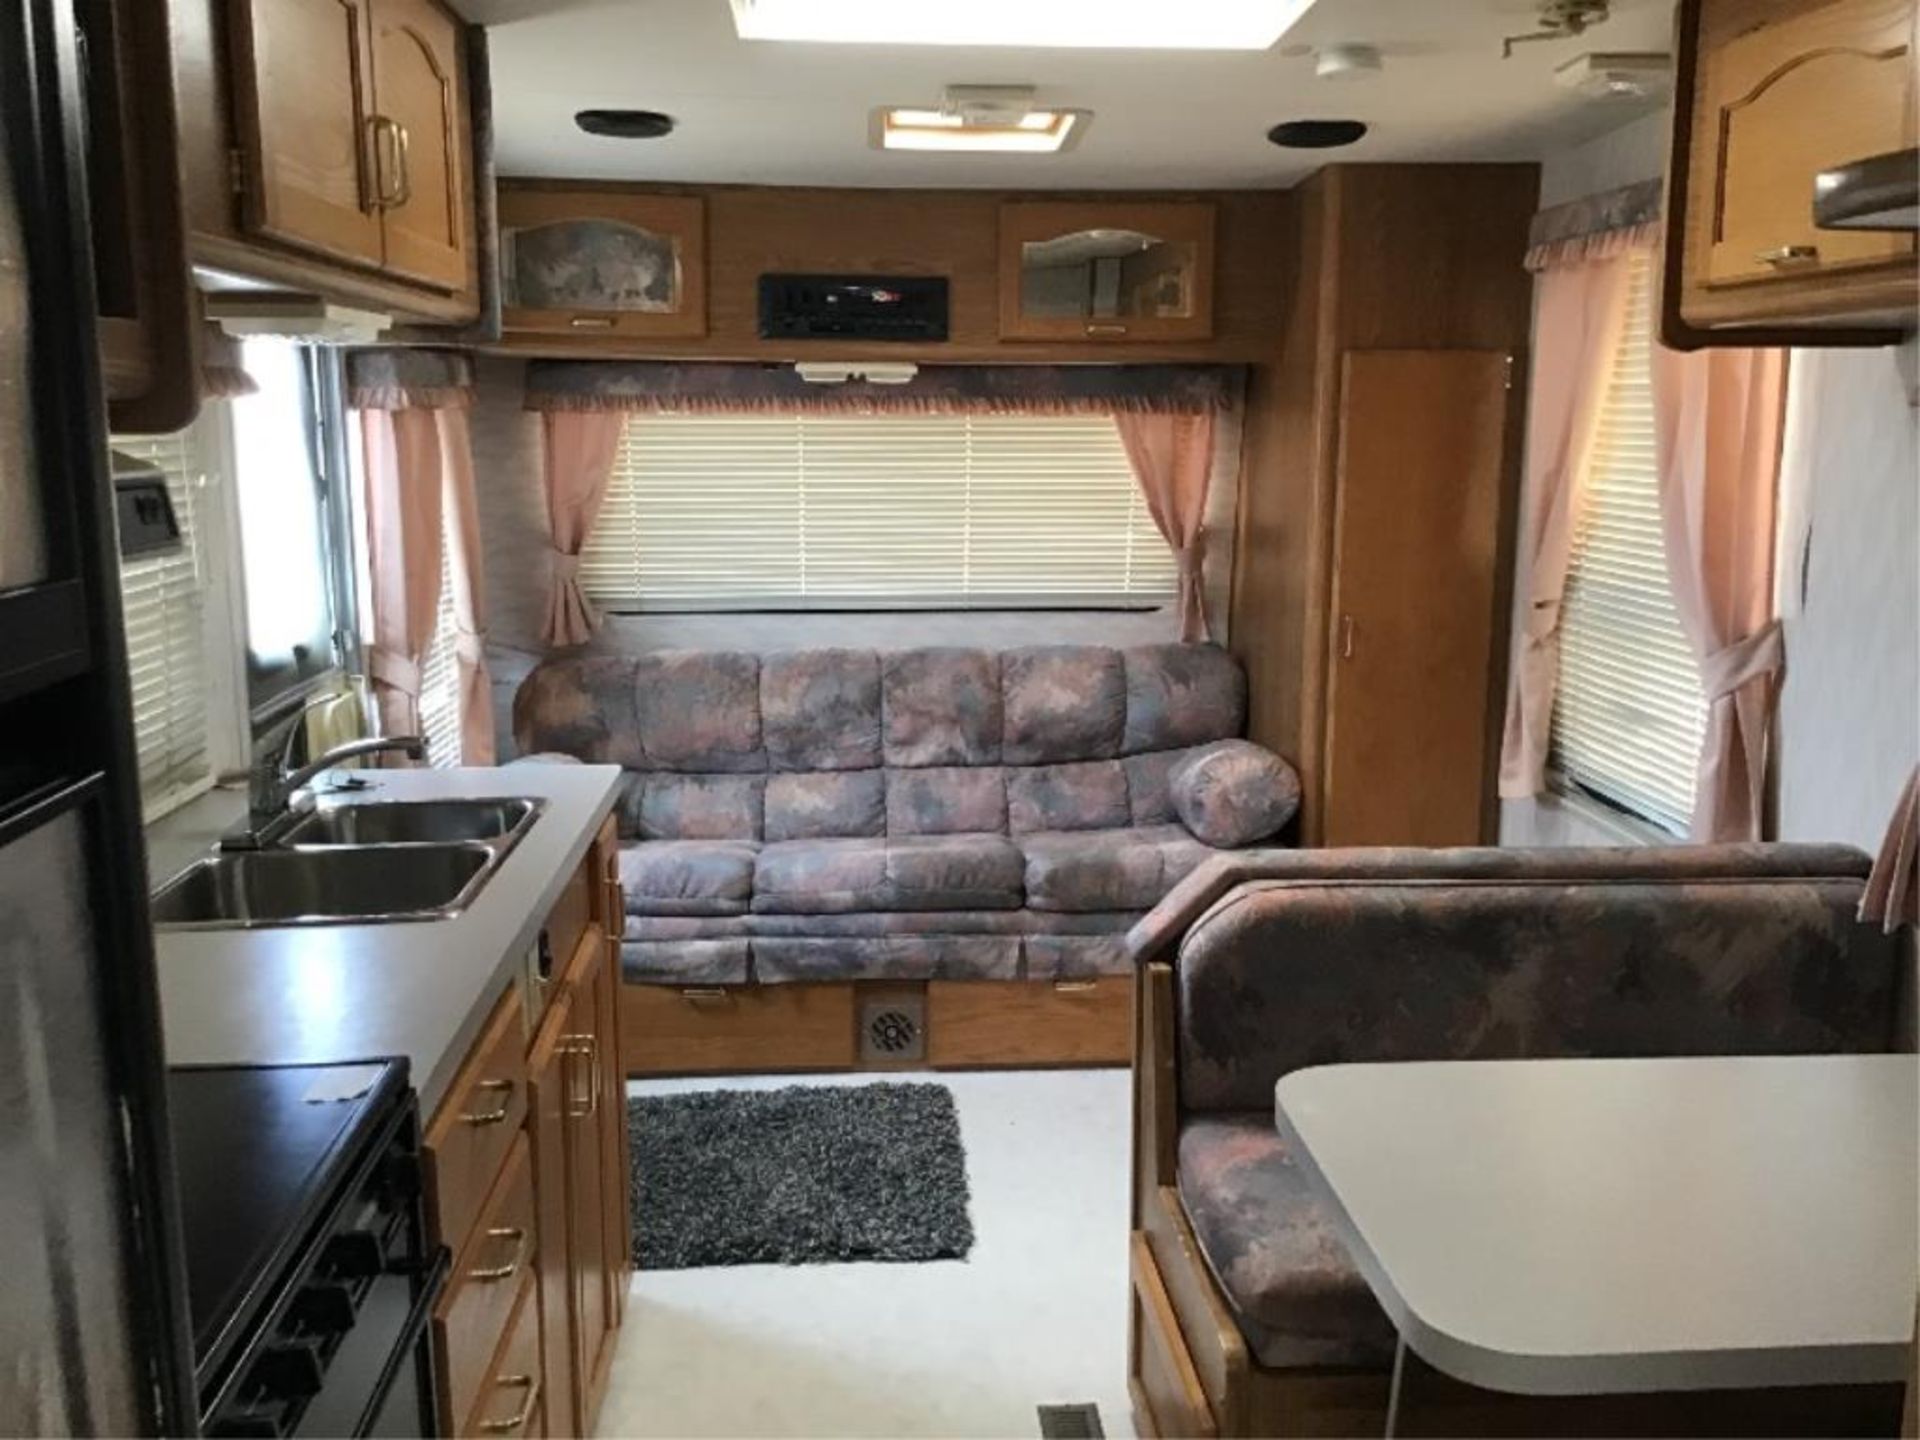 1993 Corsairs Excella 5th Wheel Holiday Trailer - Image 12 of 14